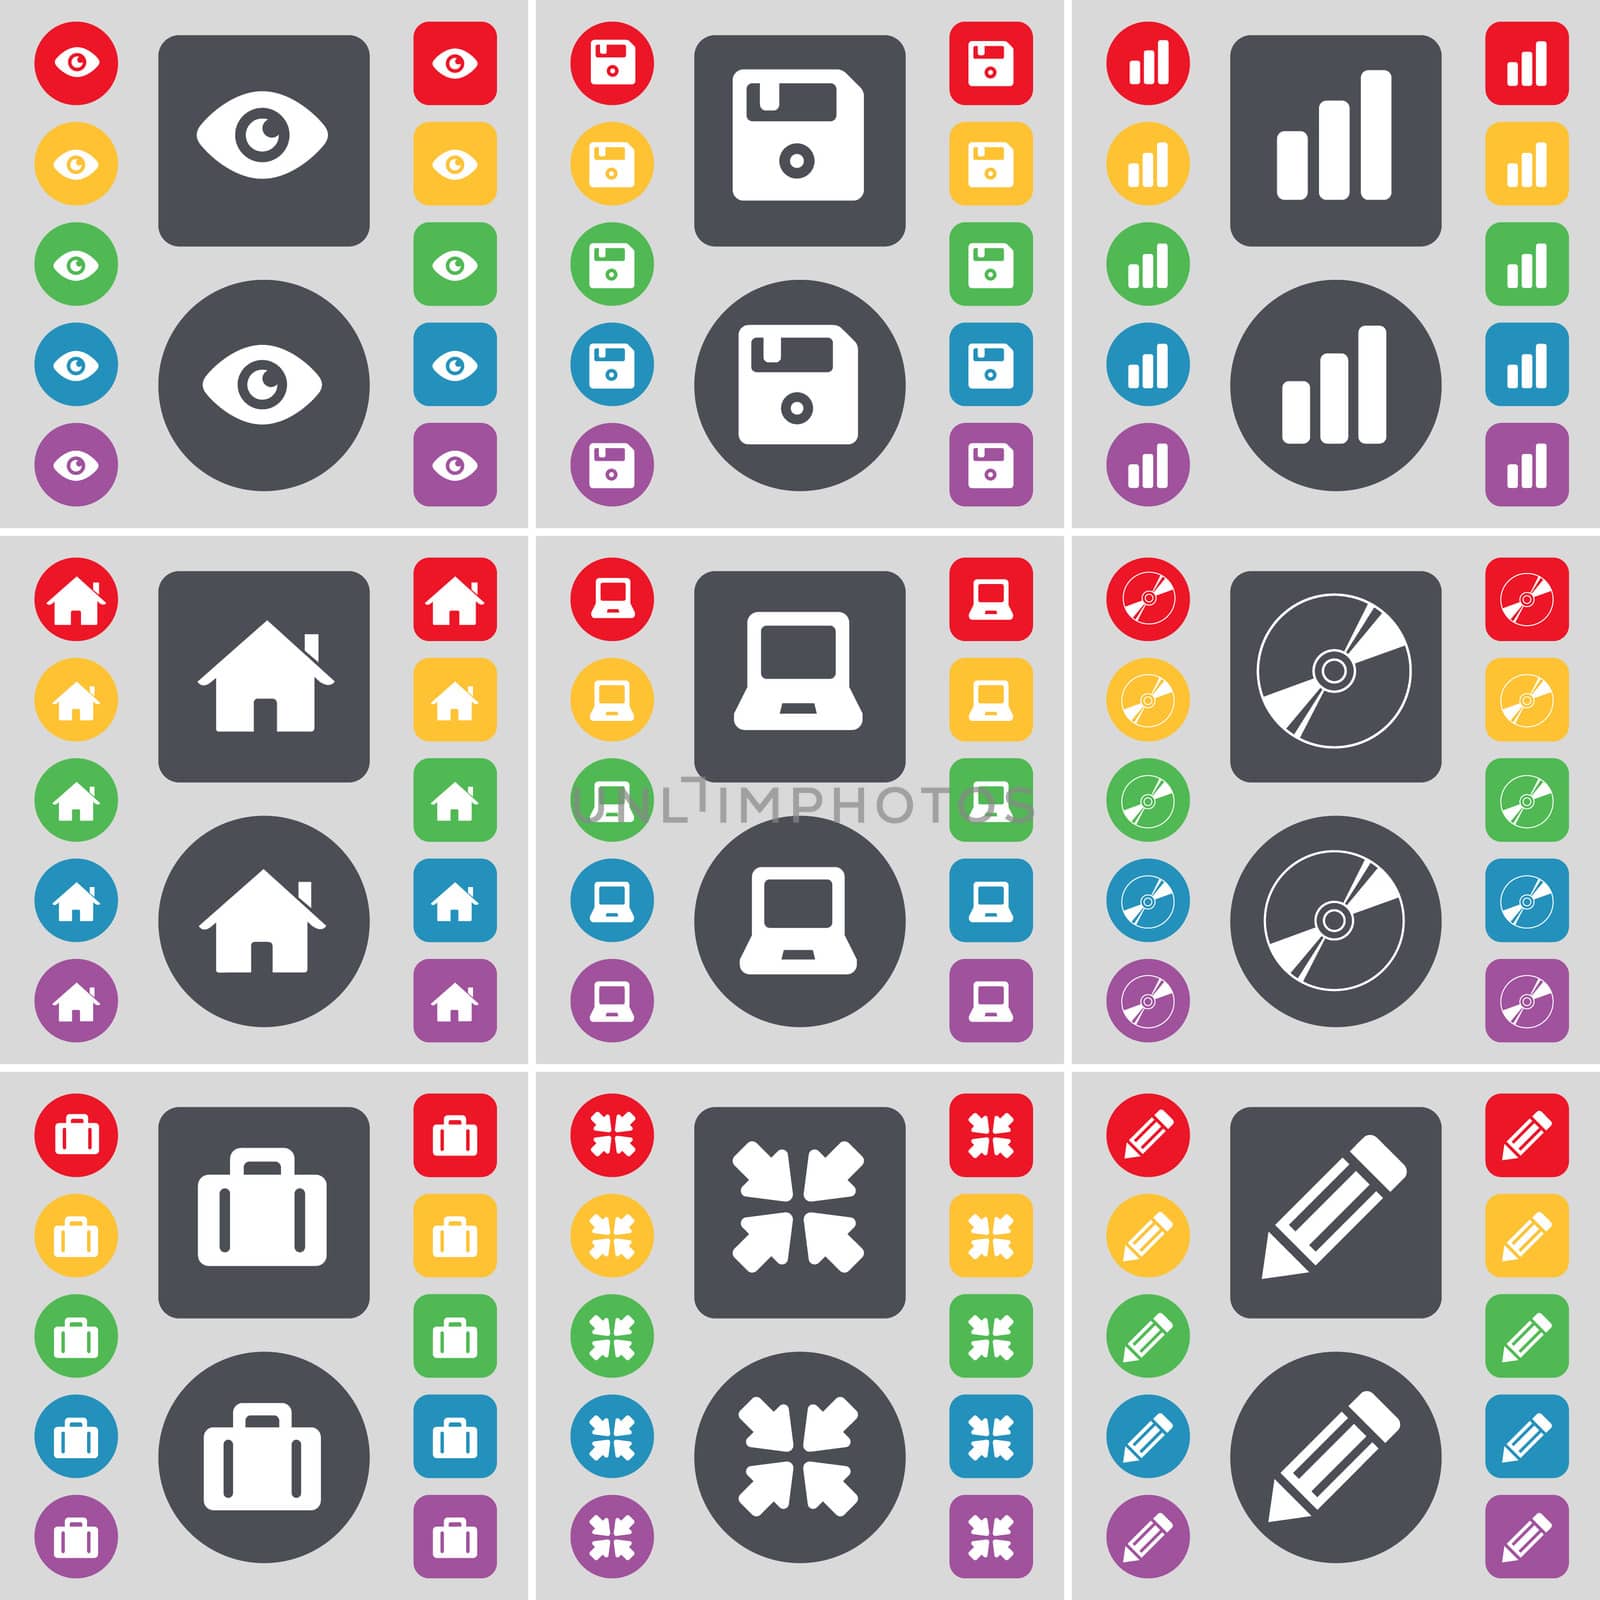 Vision, Floppy disk, Diagram, House, Laptop, DVD, Suicase, Deploying screen, Pencil icon symbol. A large set of flat, colored buttons for your design. illustration